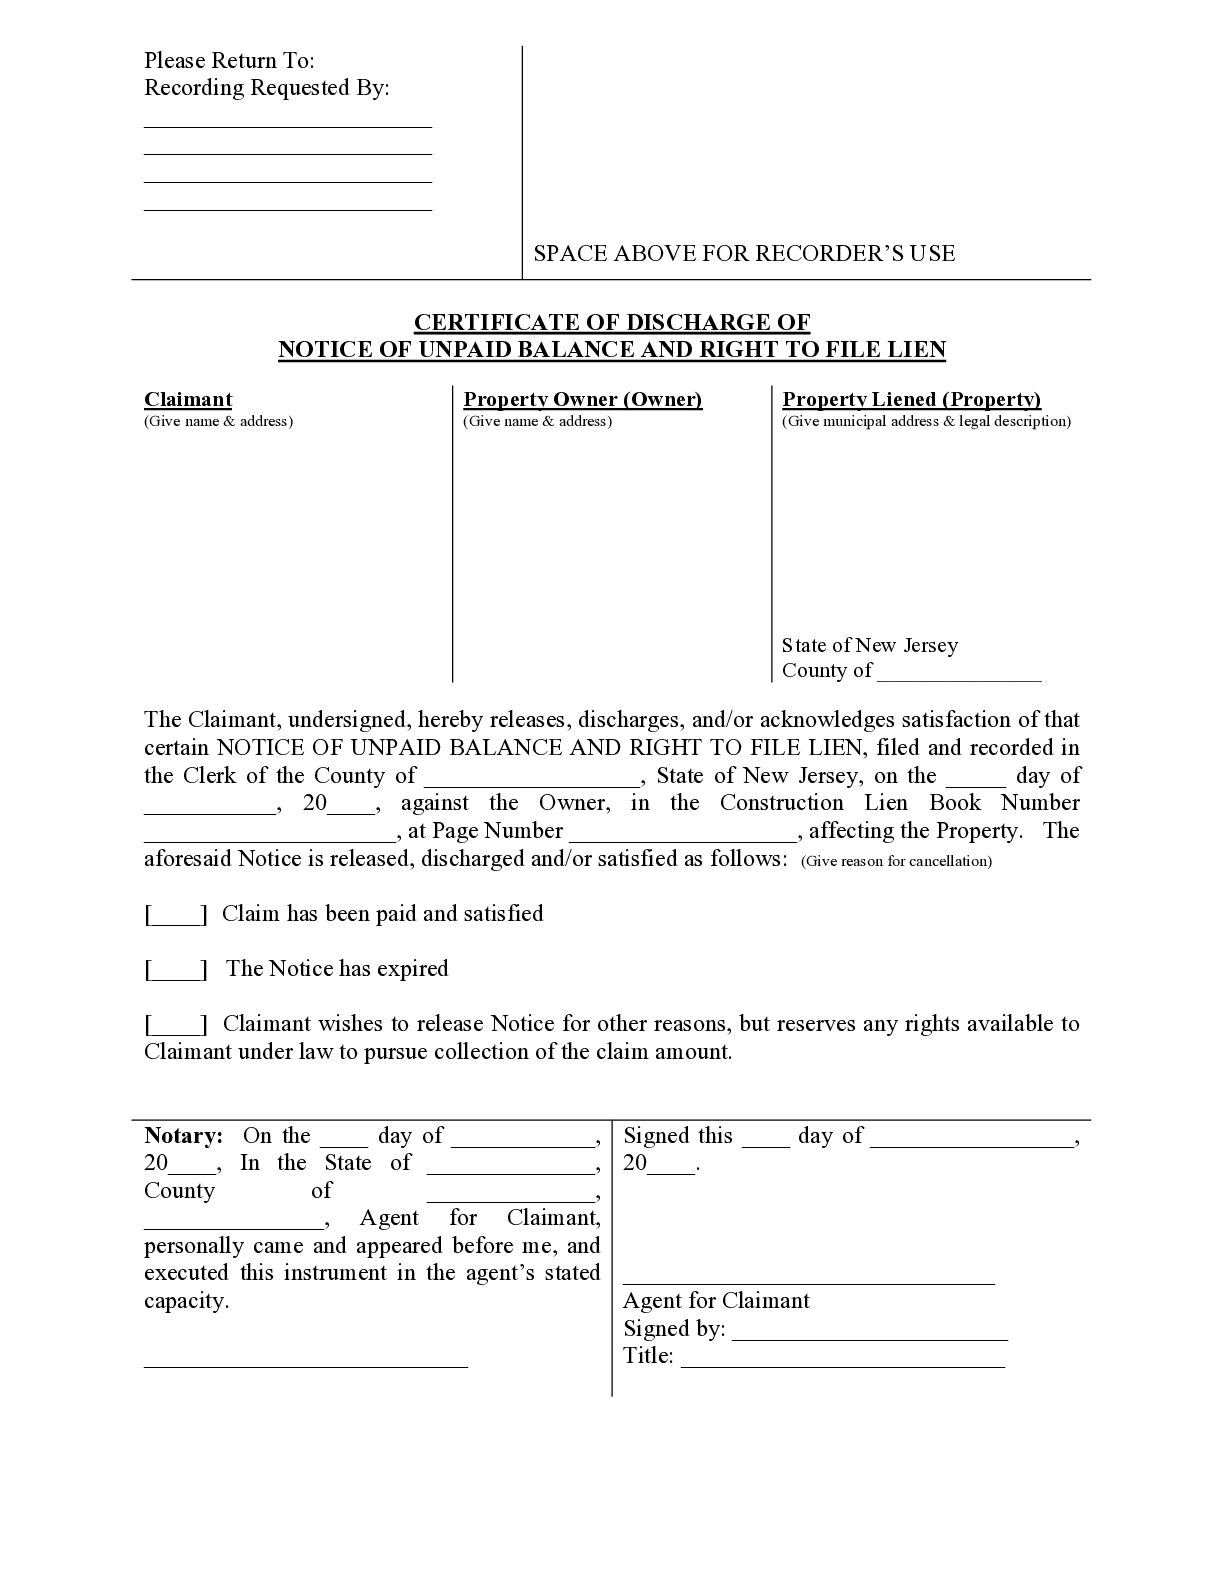 New Jersey Release of Unpaid Balance Notice Form - free from